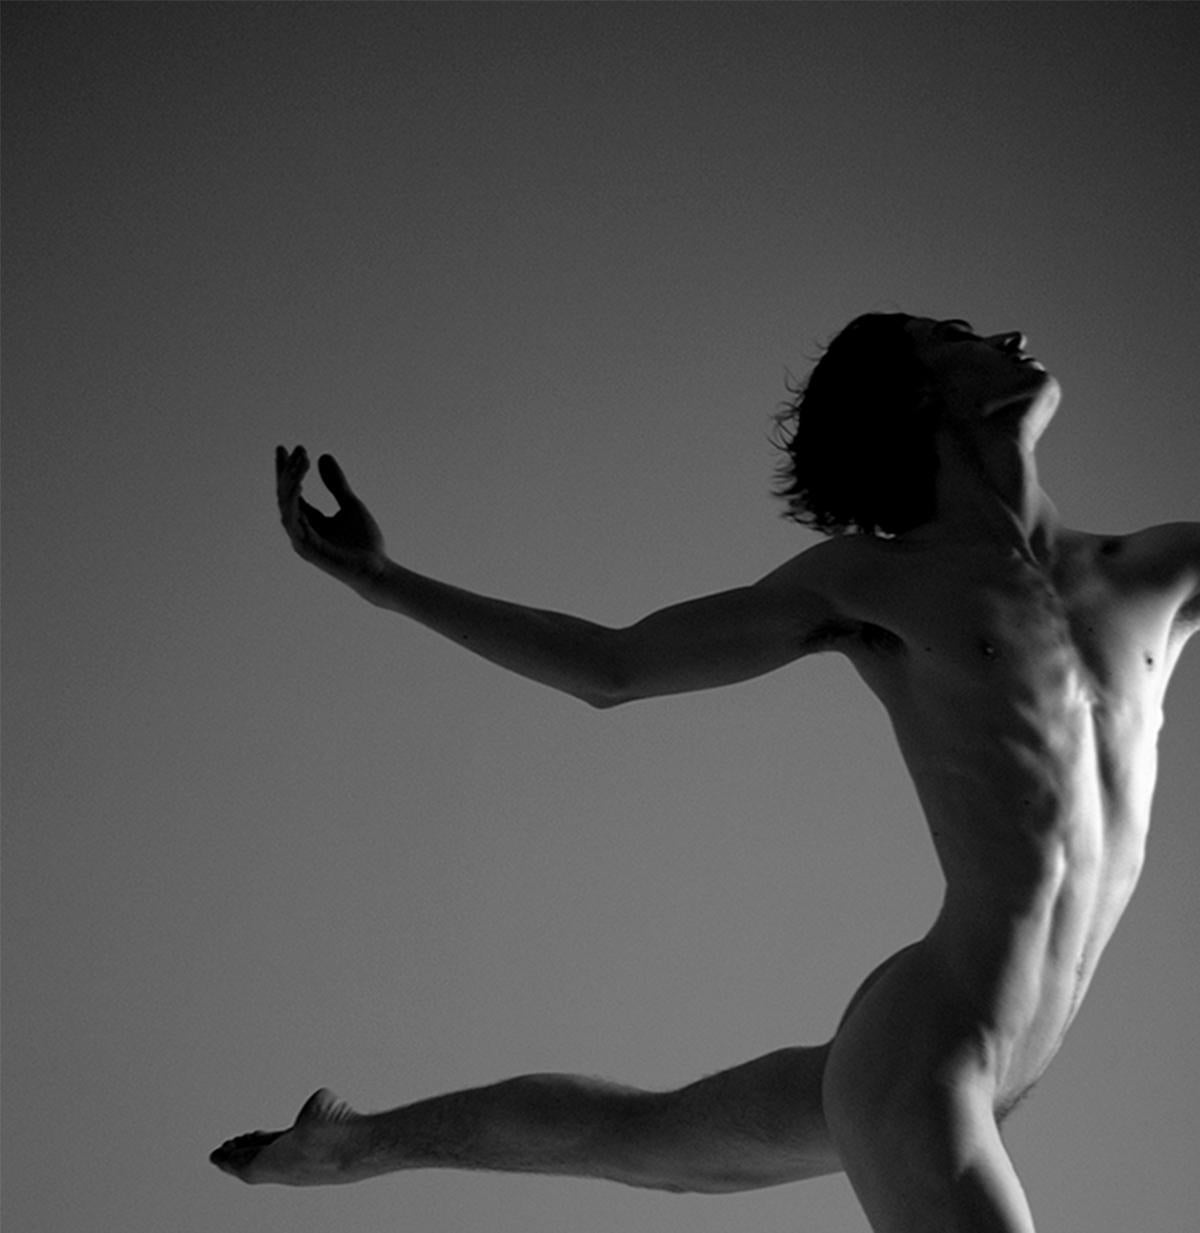 Apertura. The Bailarín, series. Male Nude dancer. Black & White photograph - Gray Nude Photograph by Ricky Cohete